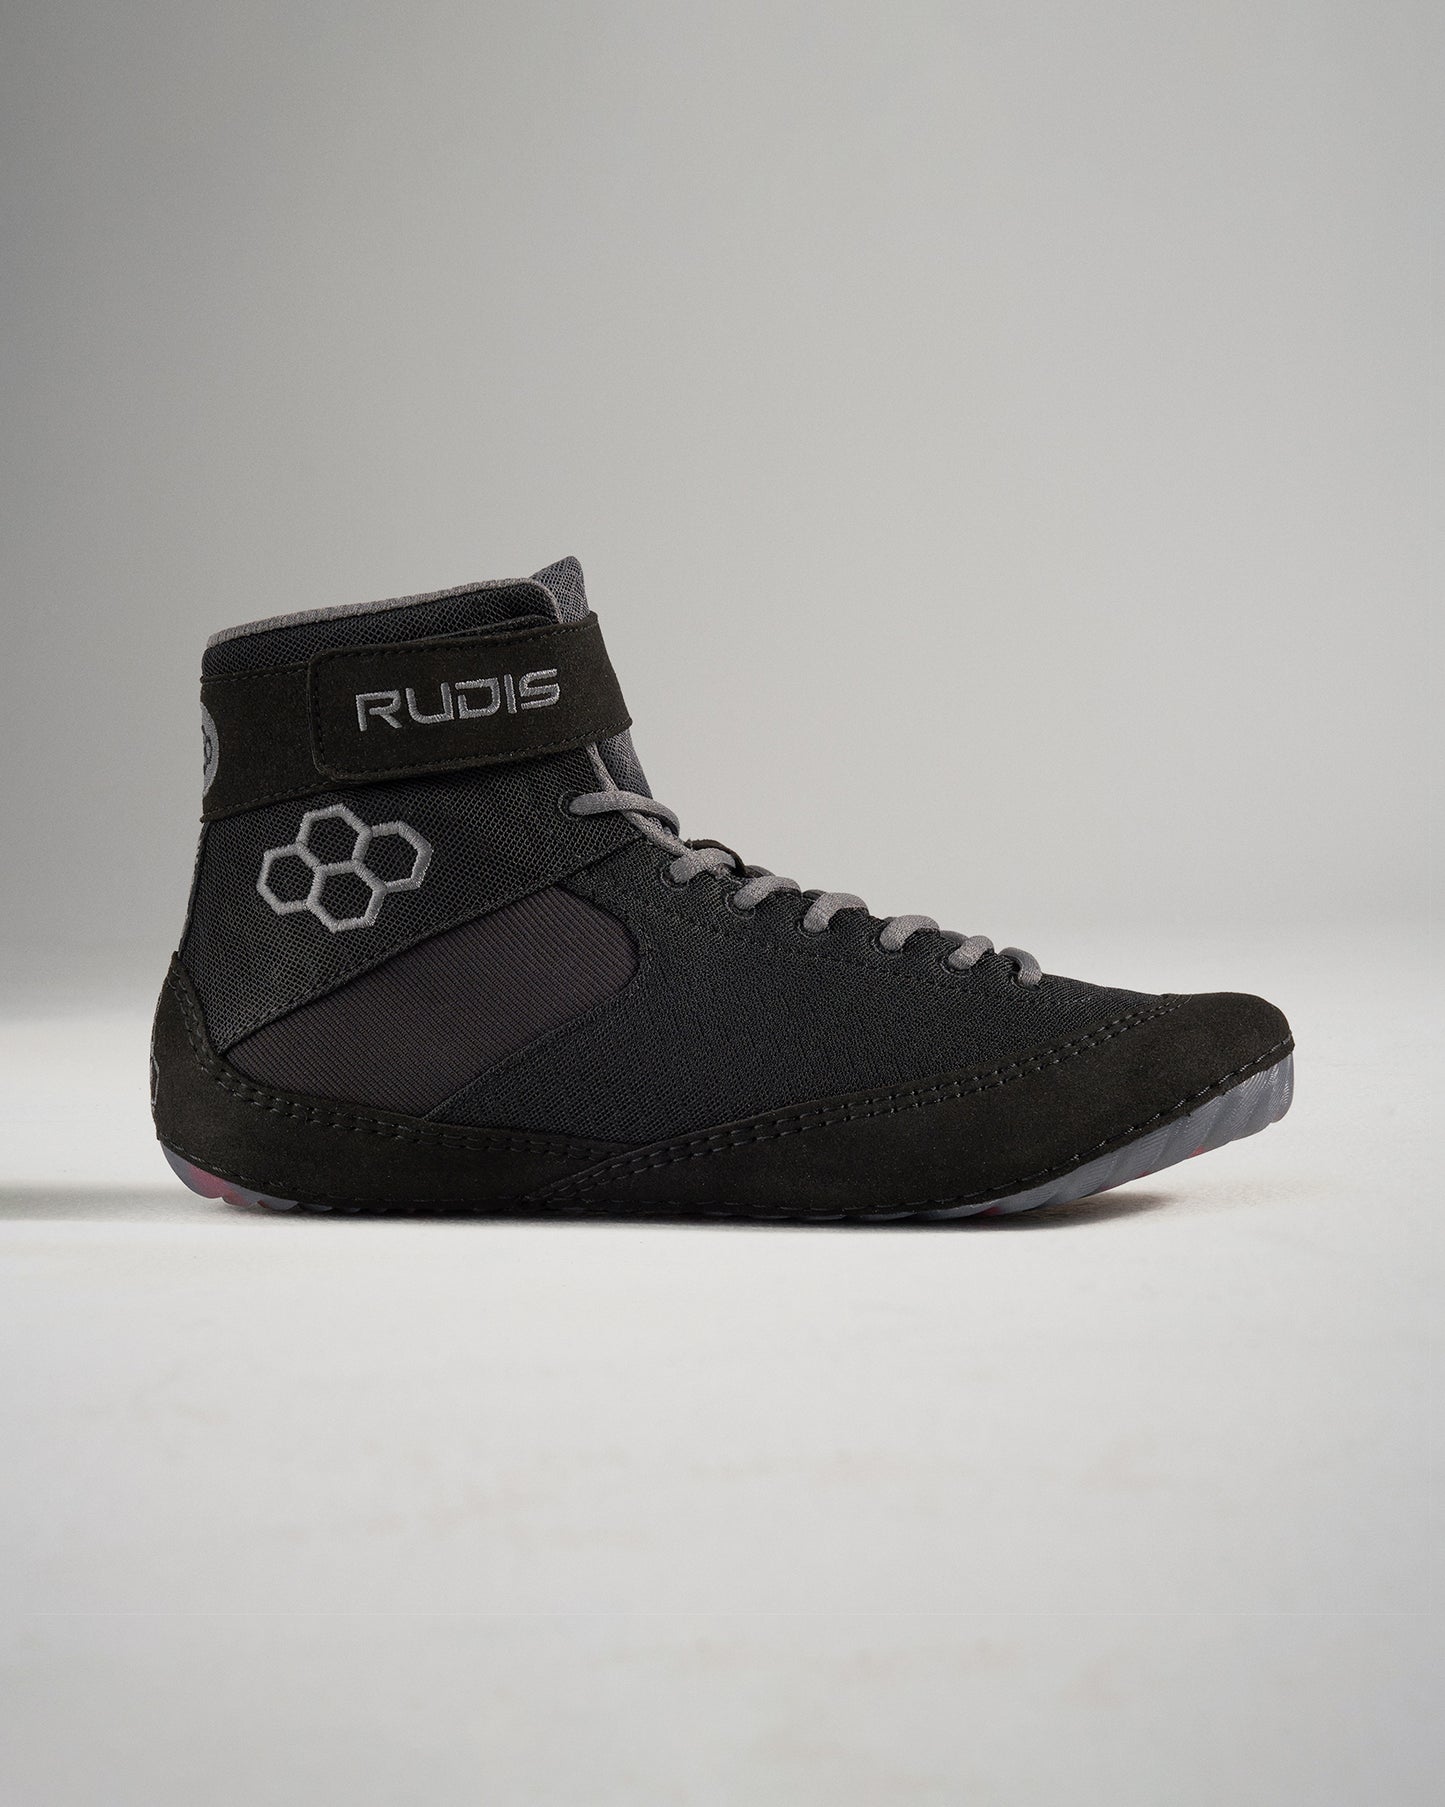 Samurai Speed Adult Wrestling Shoes - The Way